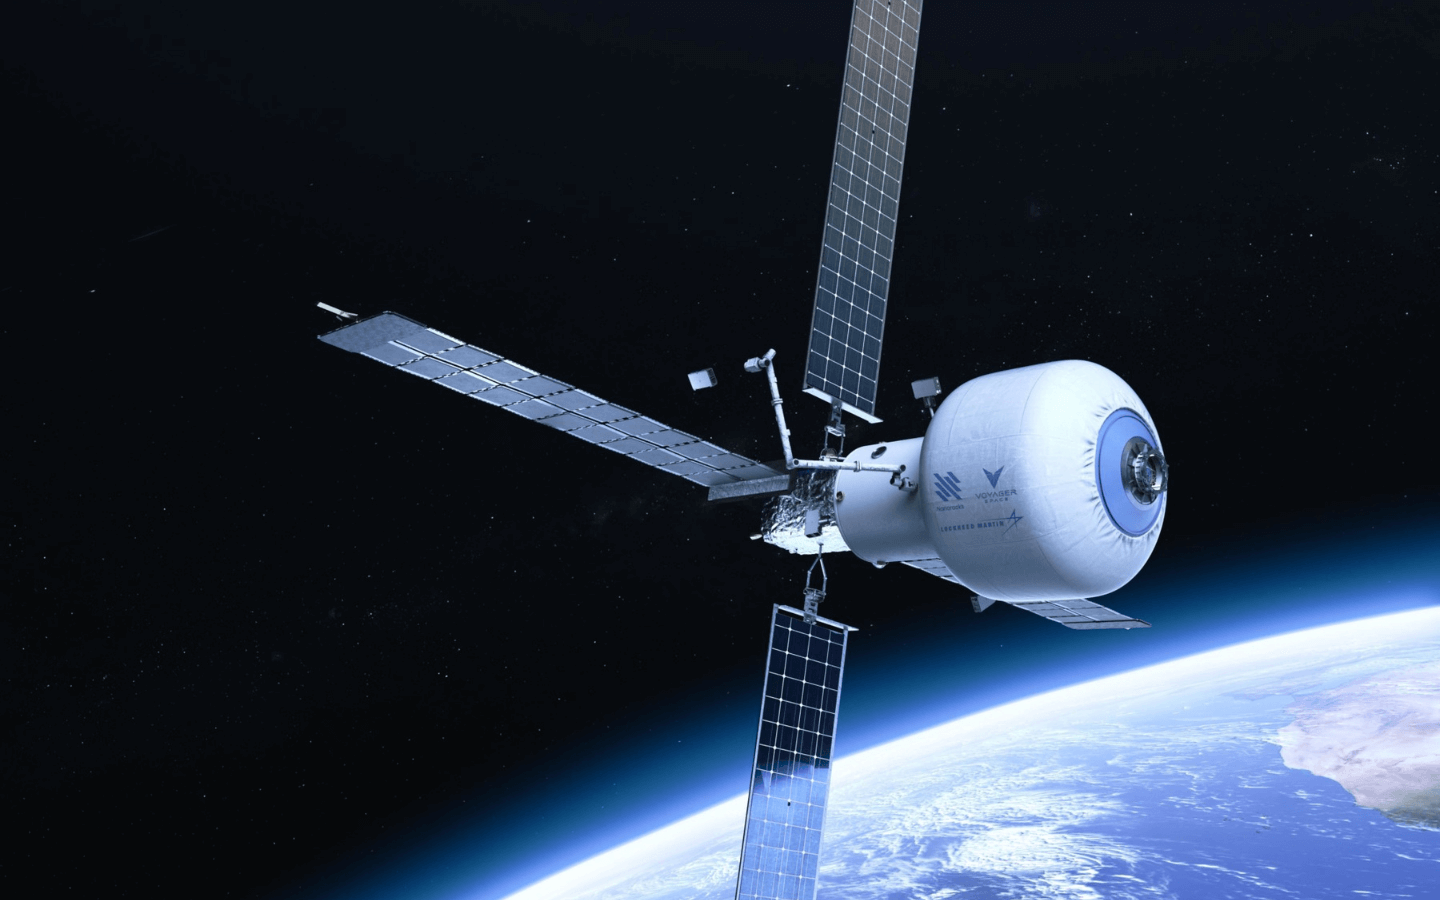 Starlab, the planned LEO space station designed by Nanoracks for commercial space activities. Image via Anisoprint.